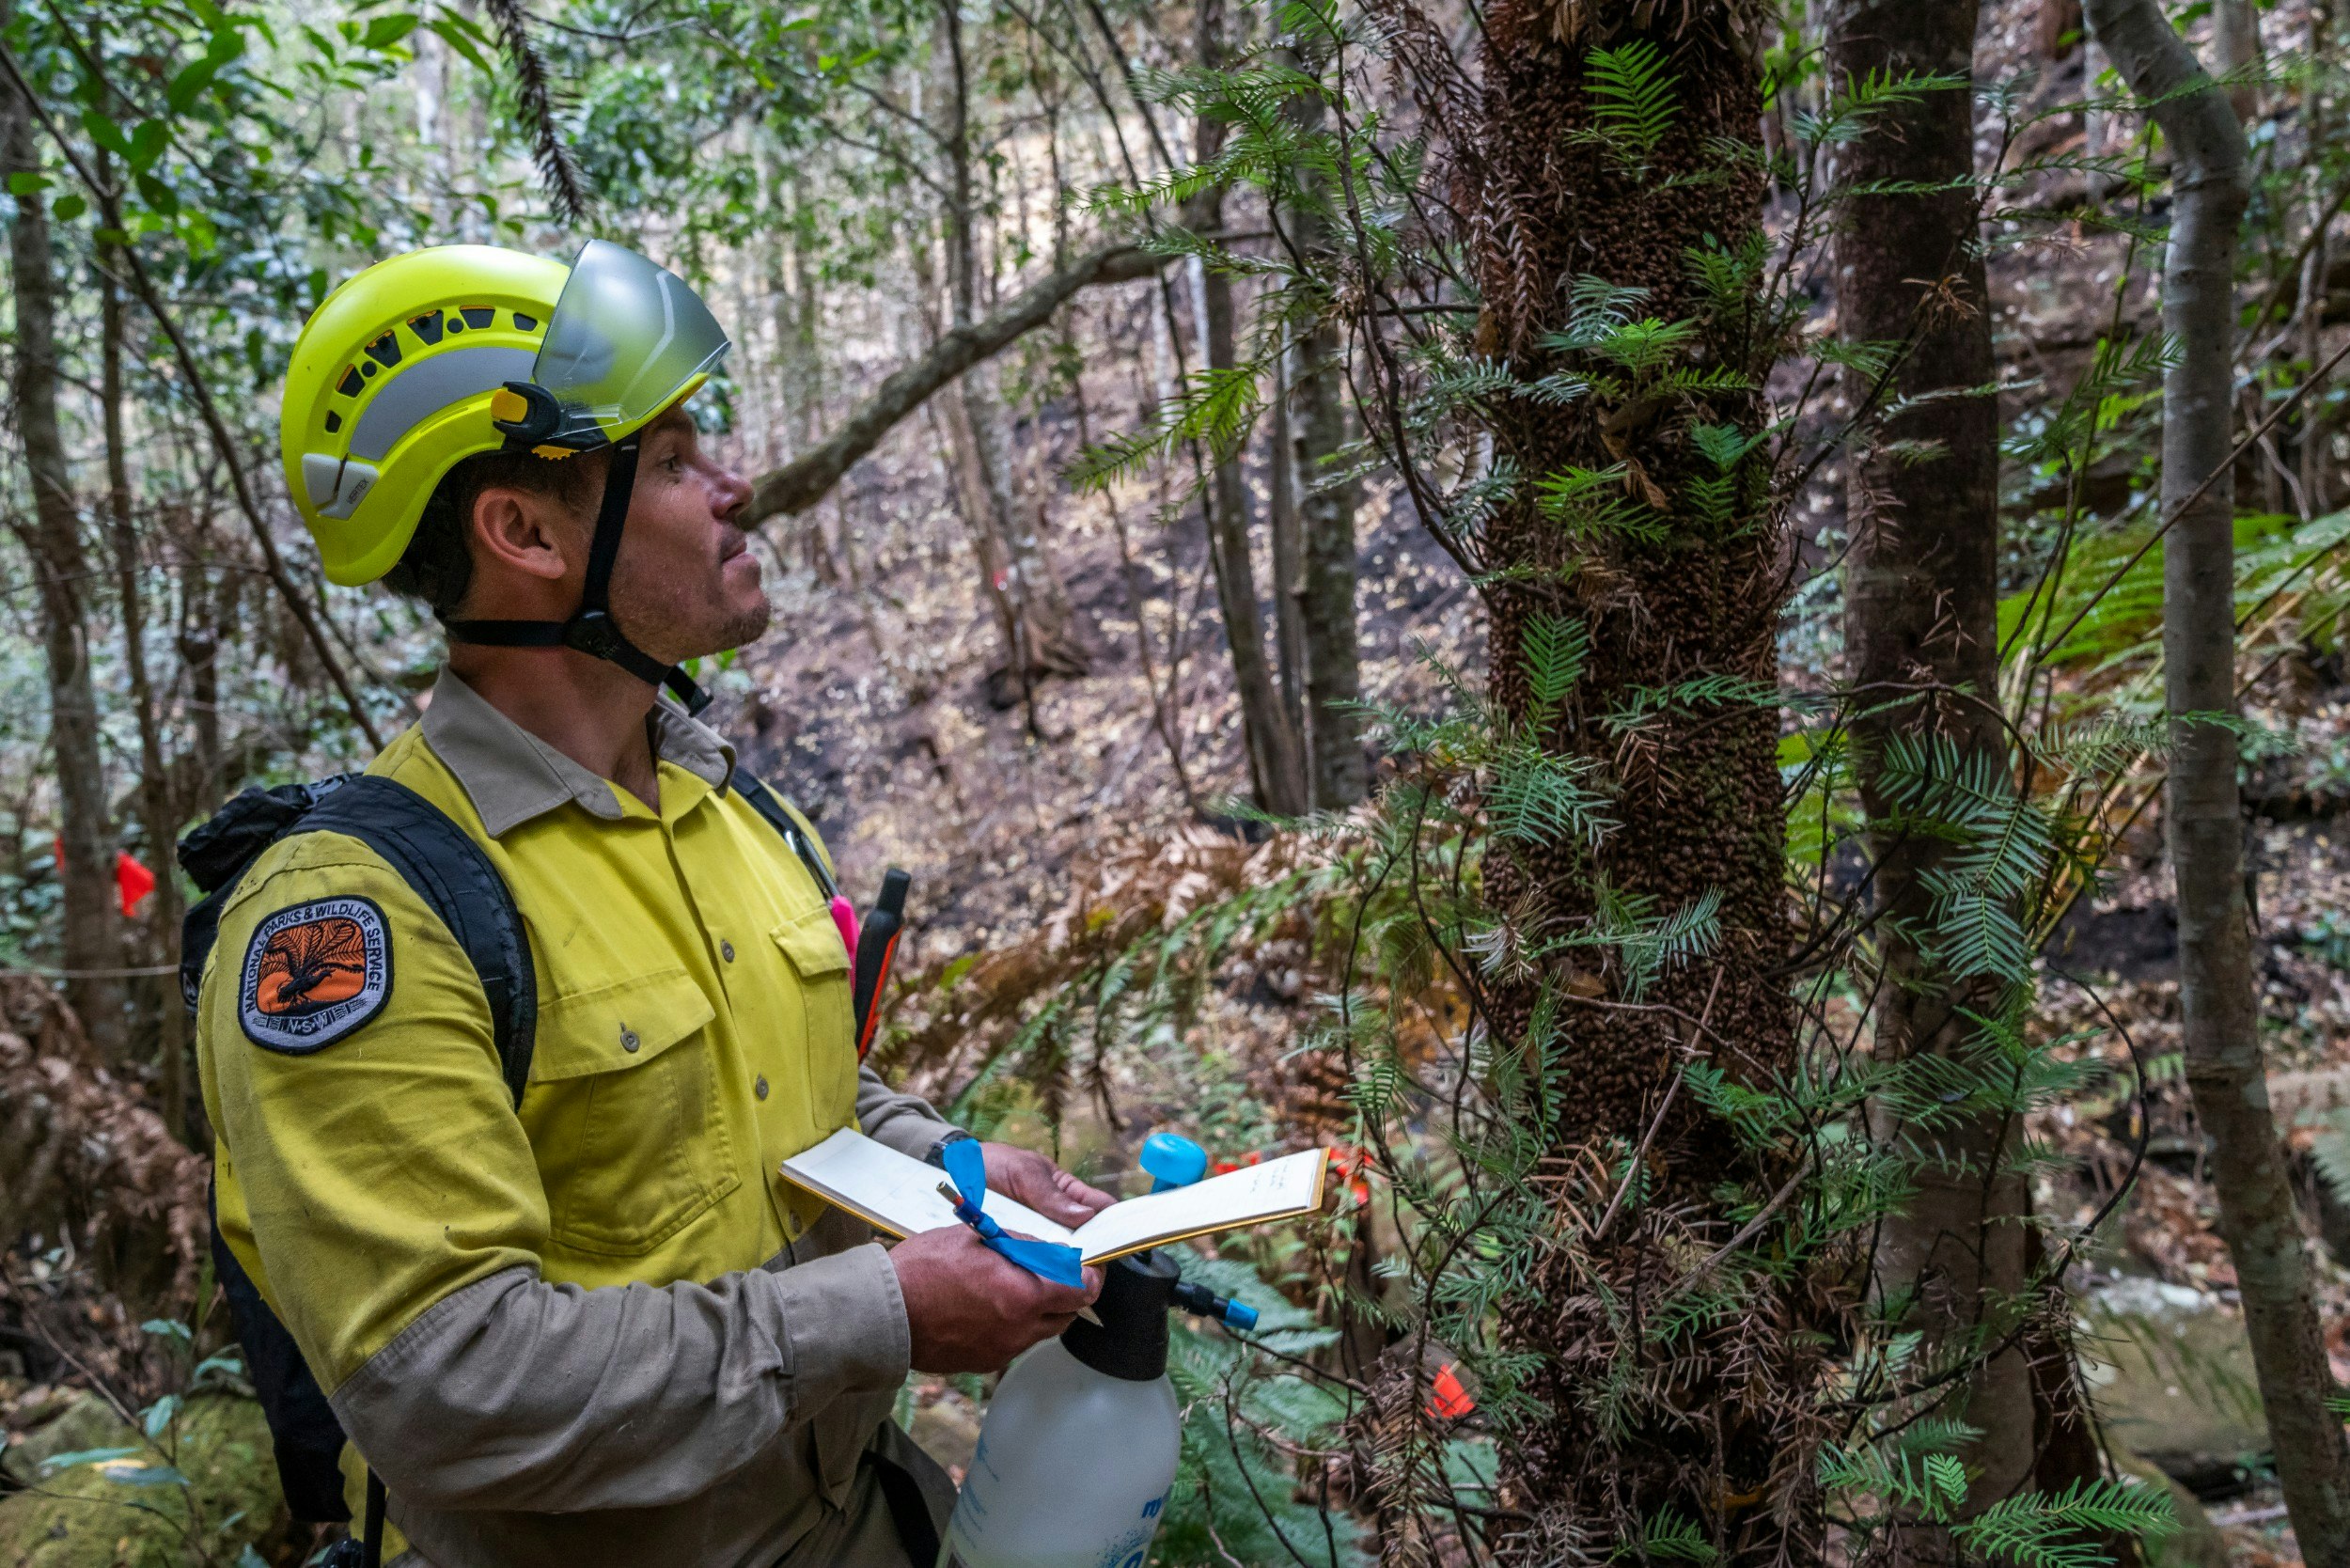 A firefighter examining Wollemi trees